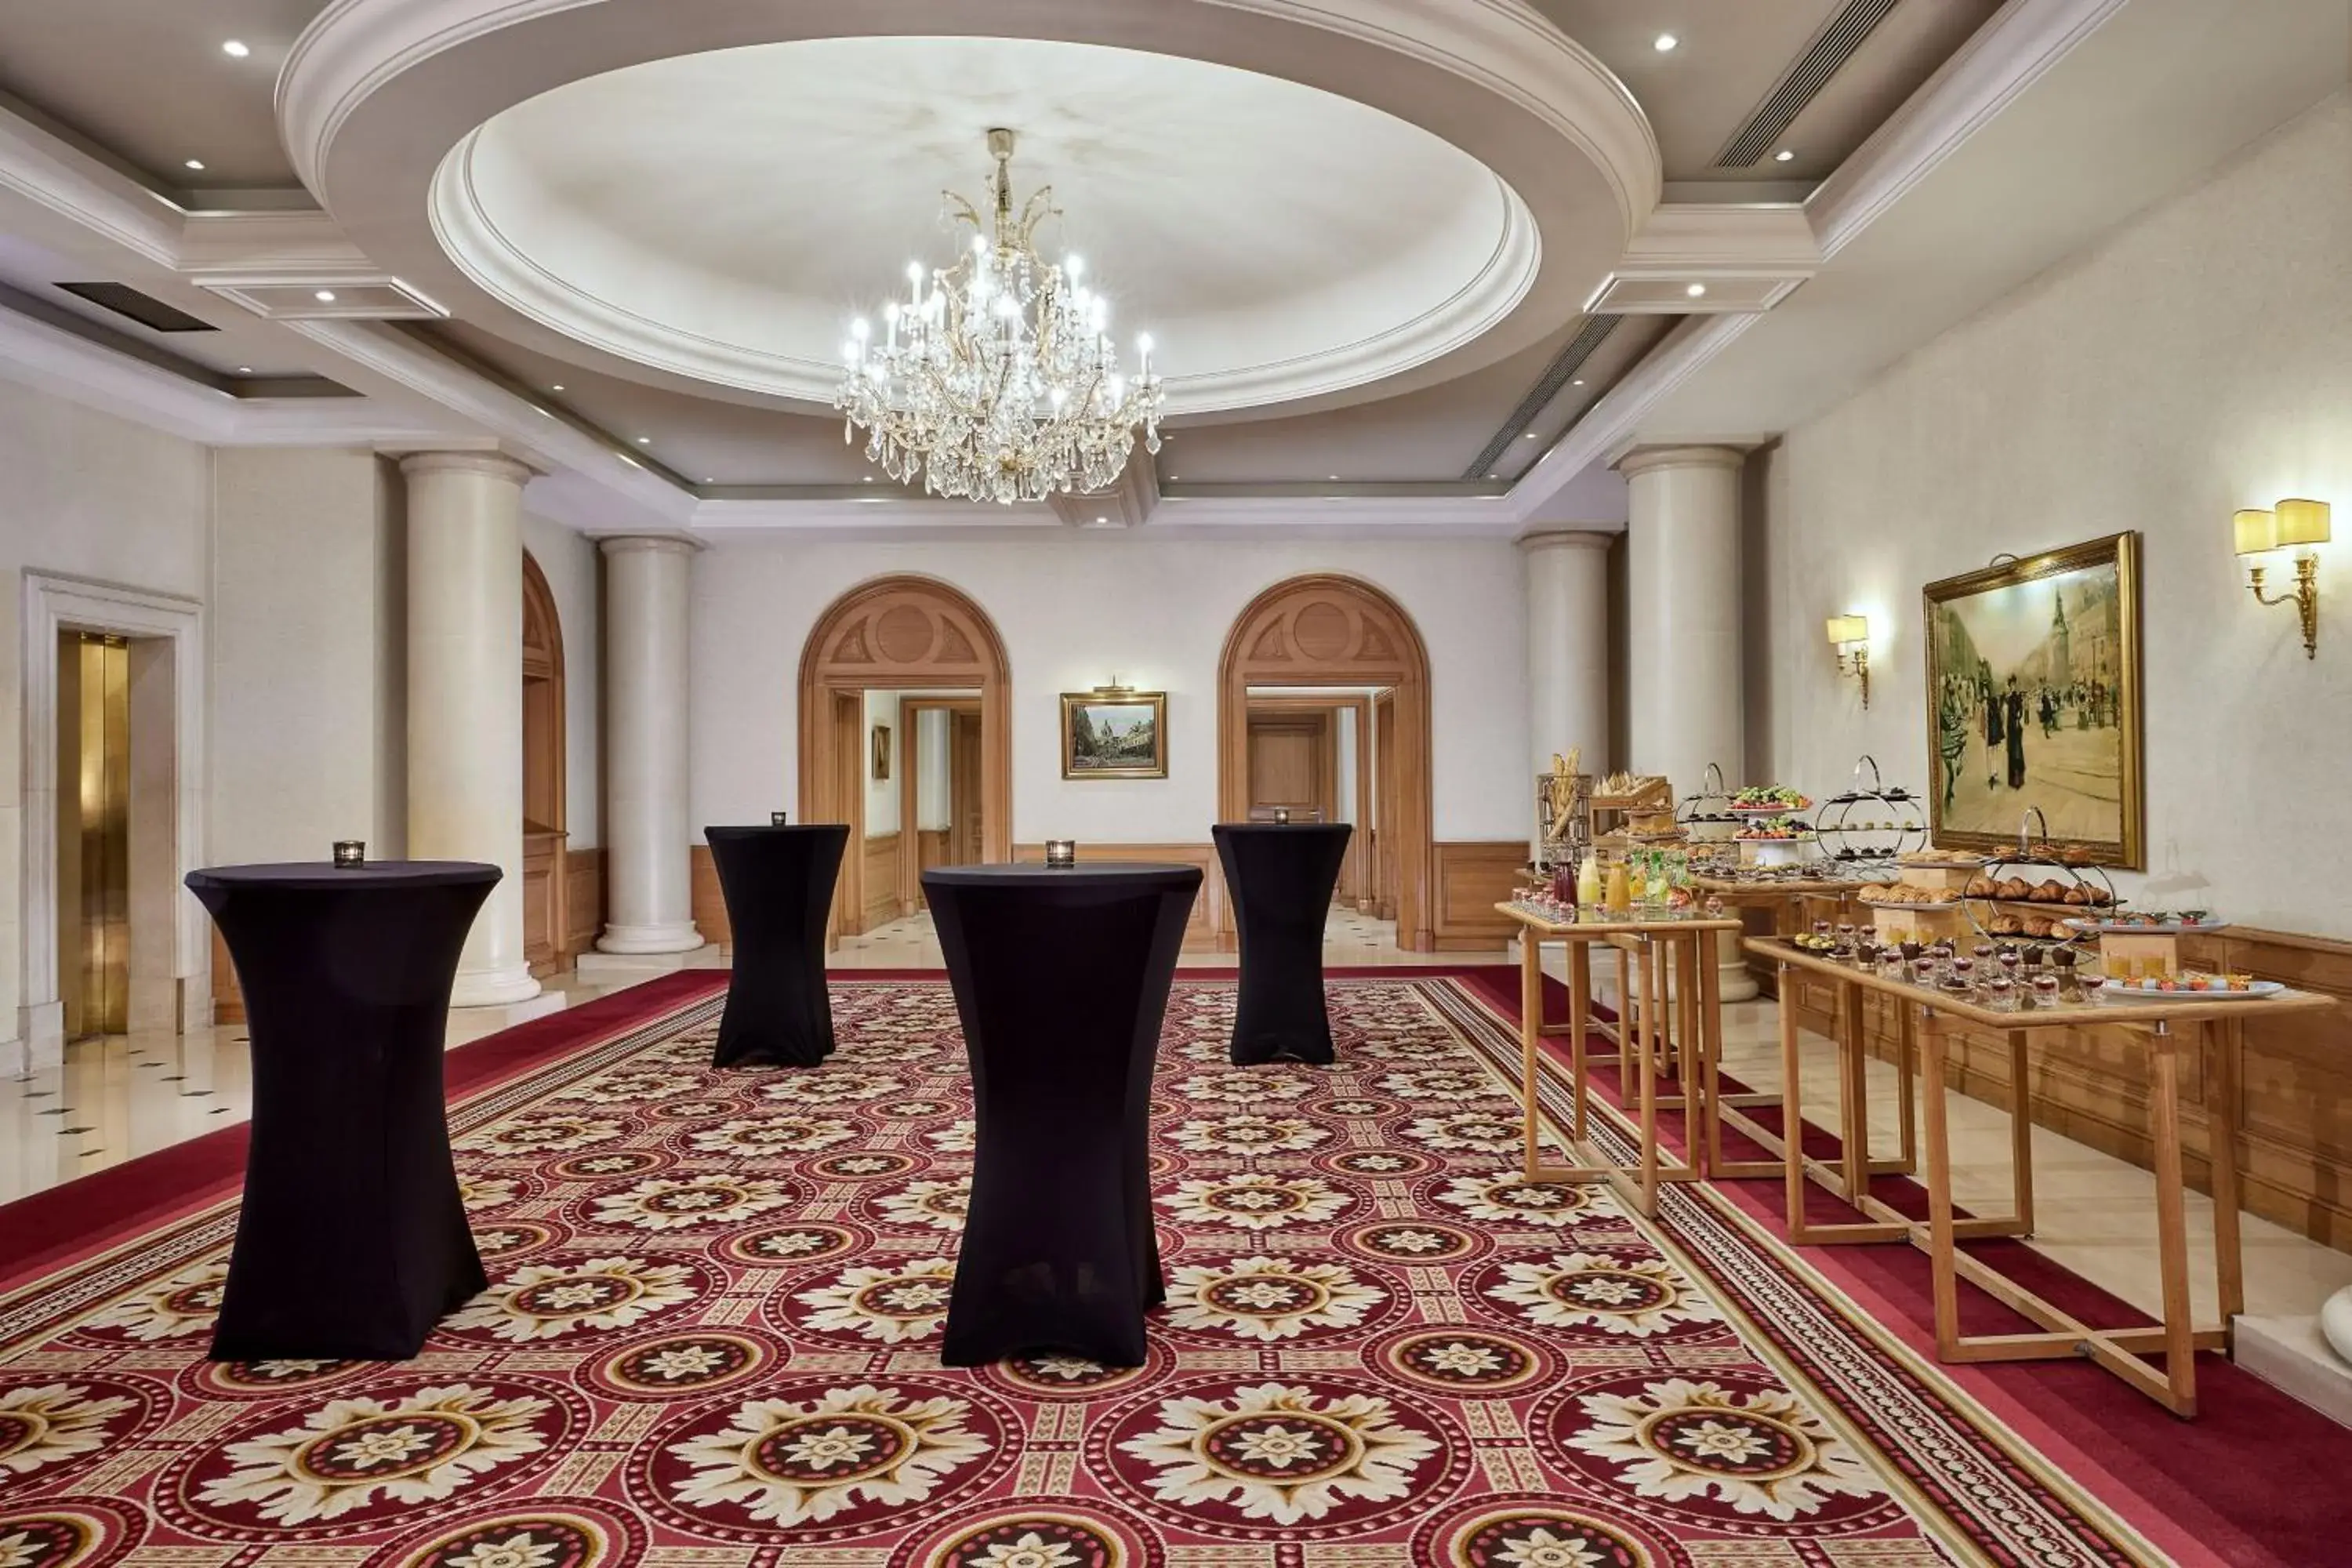 Meeting/conference room, Banquet Facilities in Paris Marriott Champs Elysees Hotel